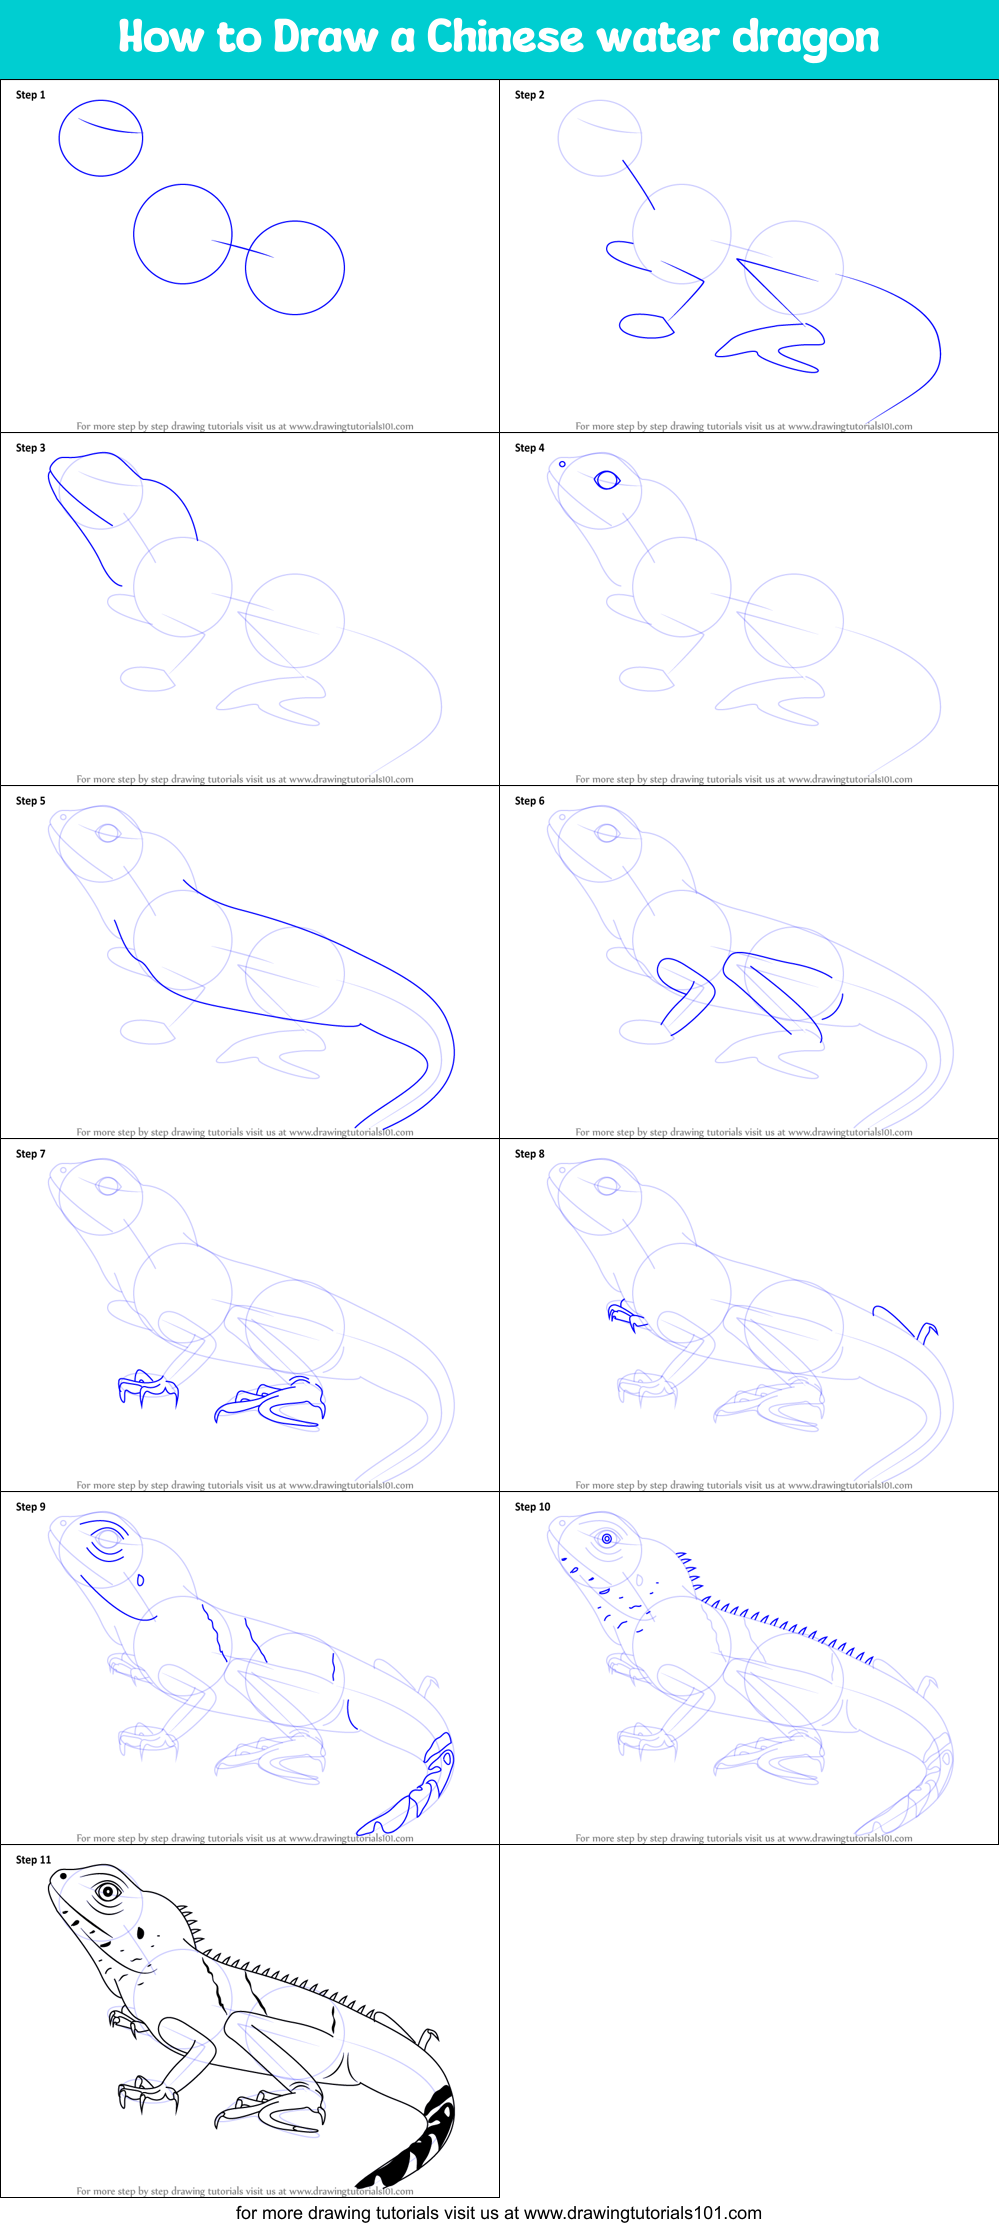 How to Draw a Chinese water dragon printable step by step drawing sheet